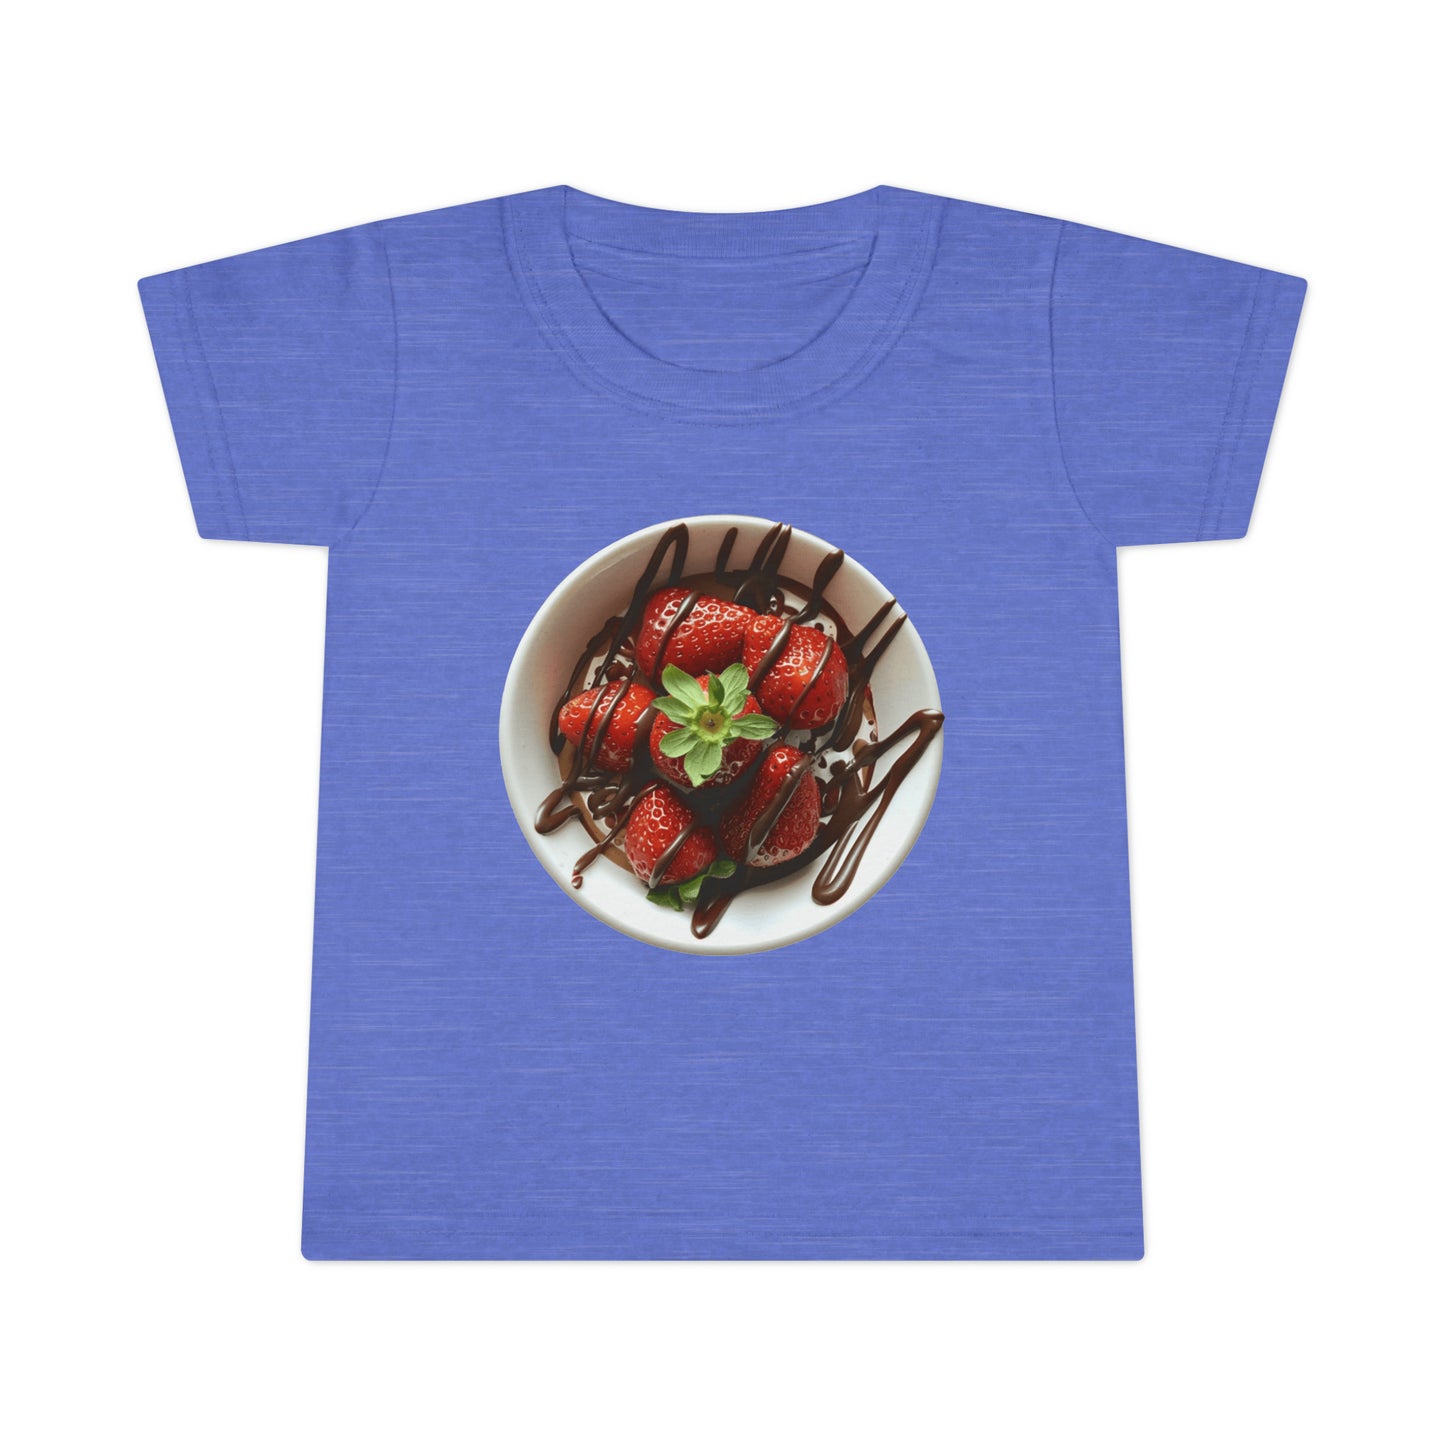 Strawberry Chocolate Trend - What You Won't Do for Love, Gifts, Toddler T-shirt